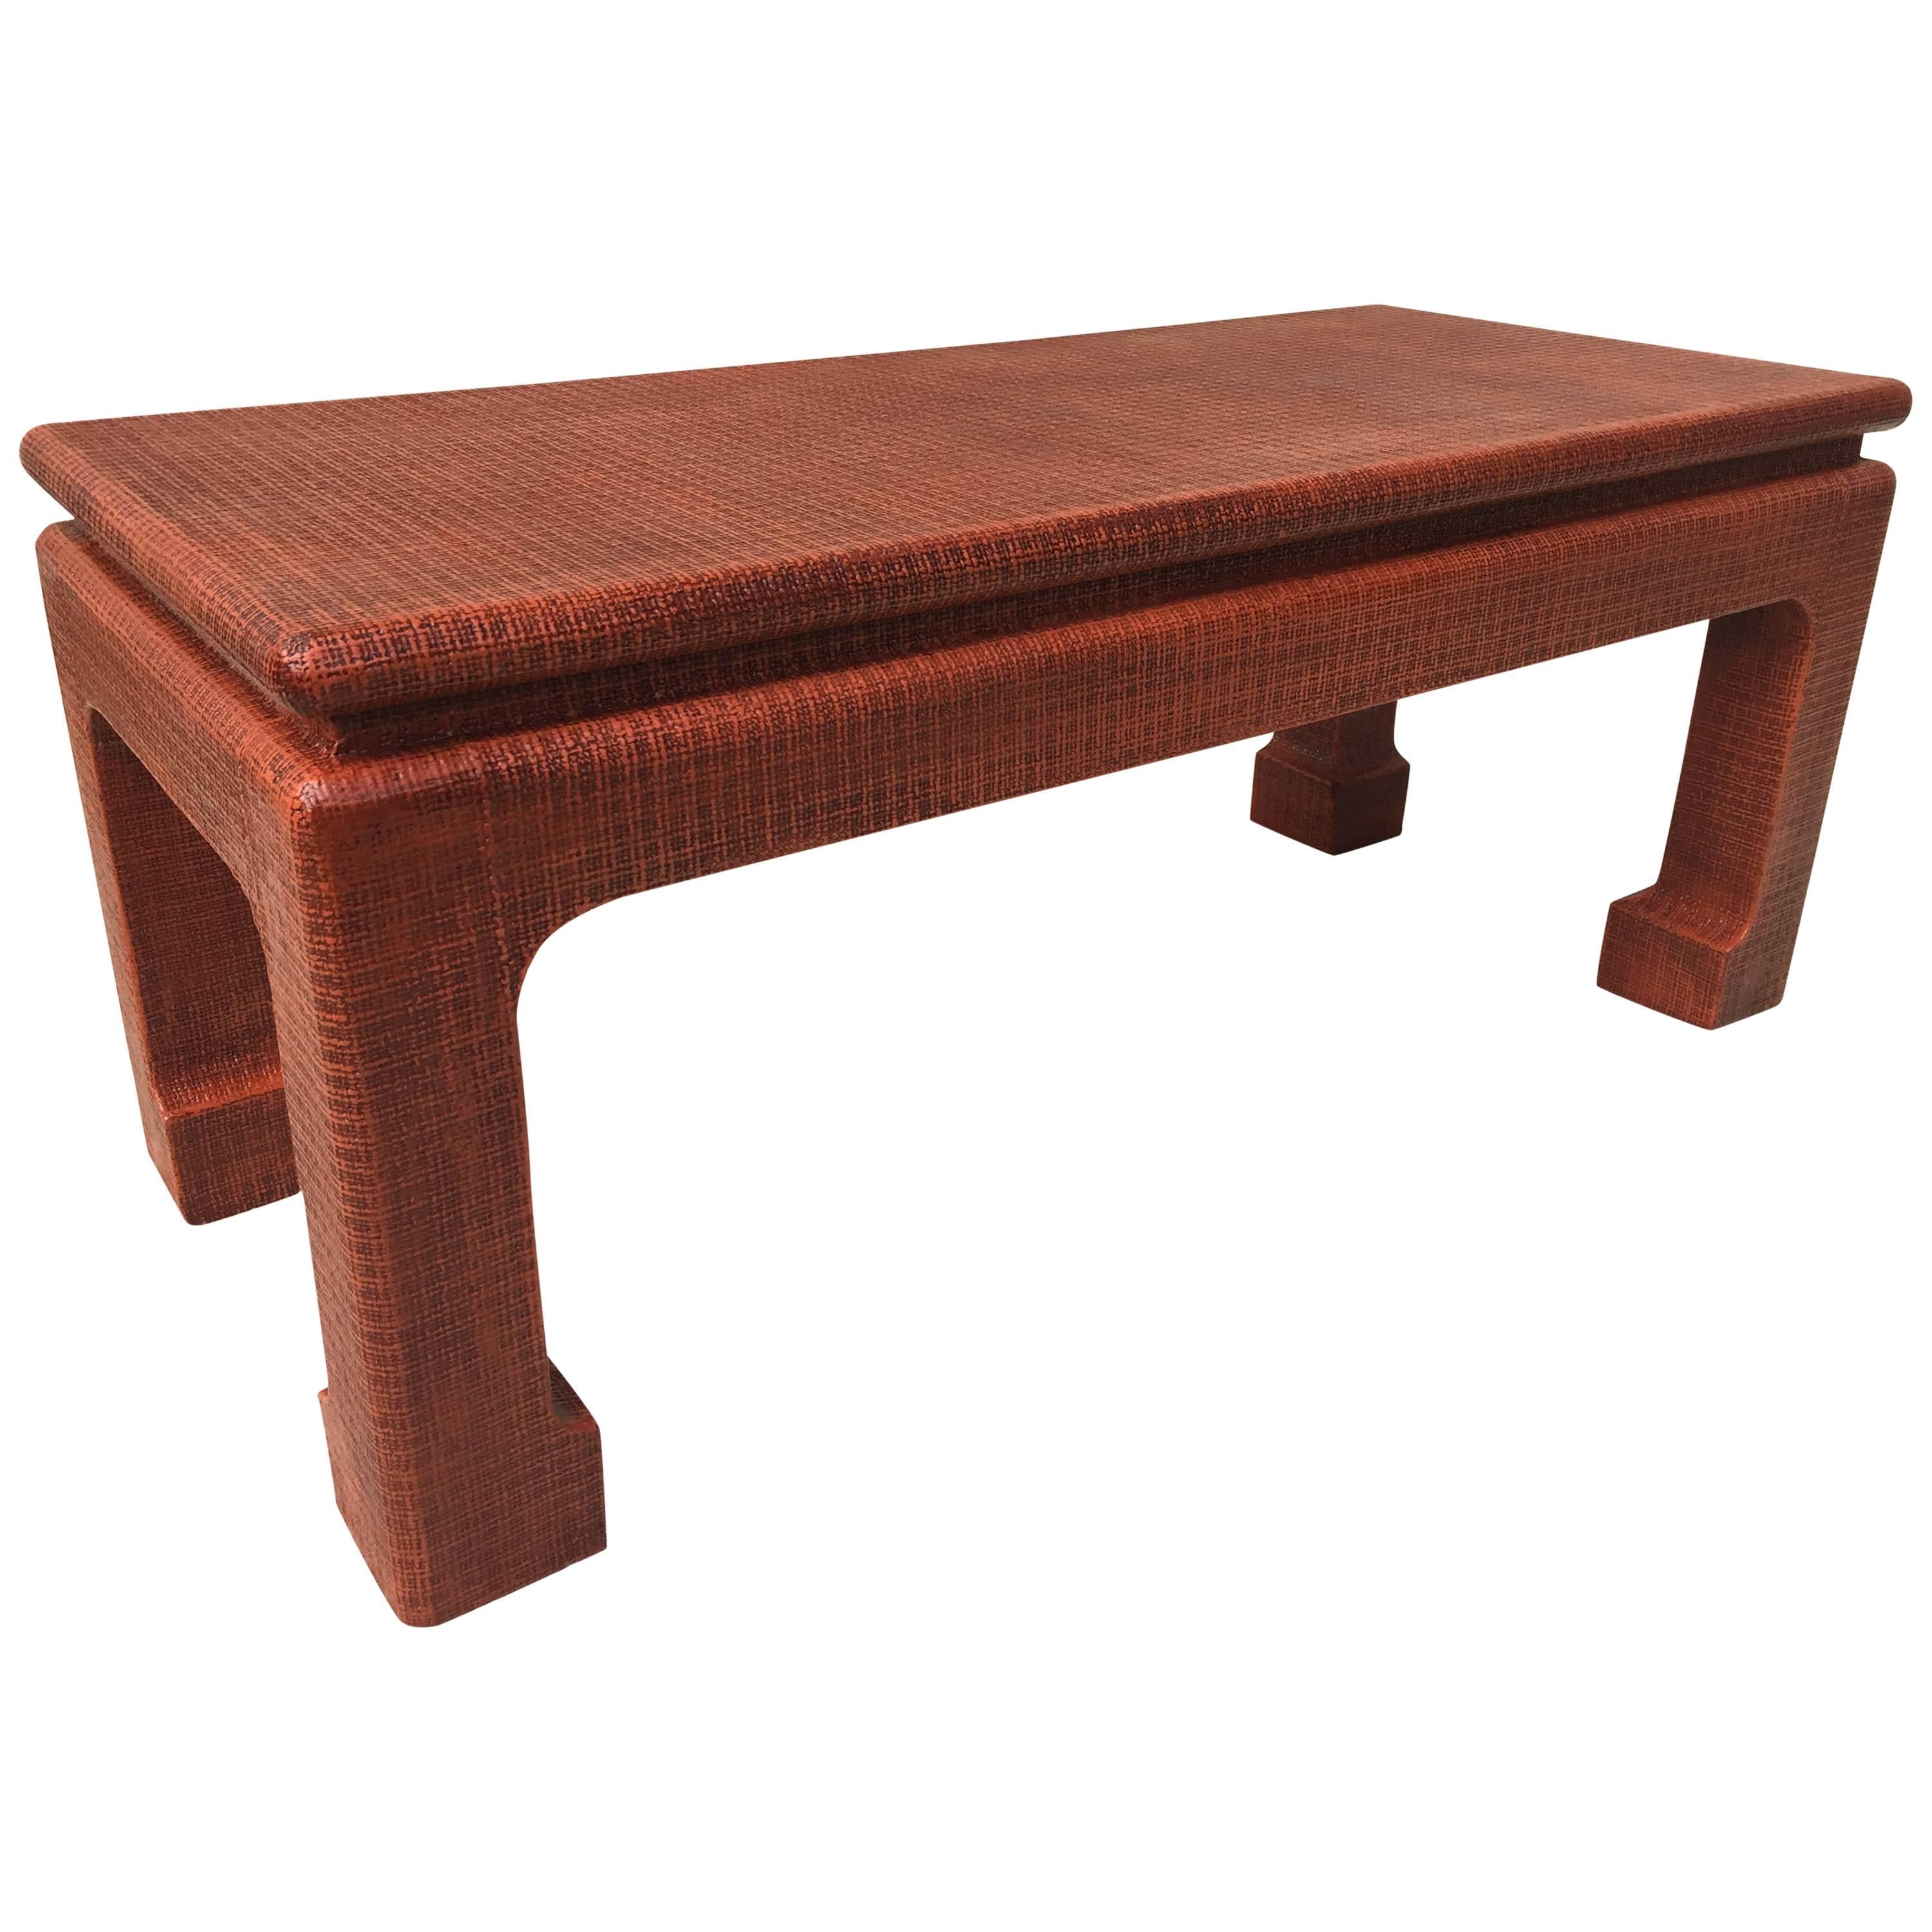 Karl Springer Style Grass Cloth Petite Table or Bench, Orange Lacquer For Sale